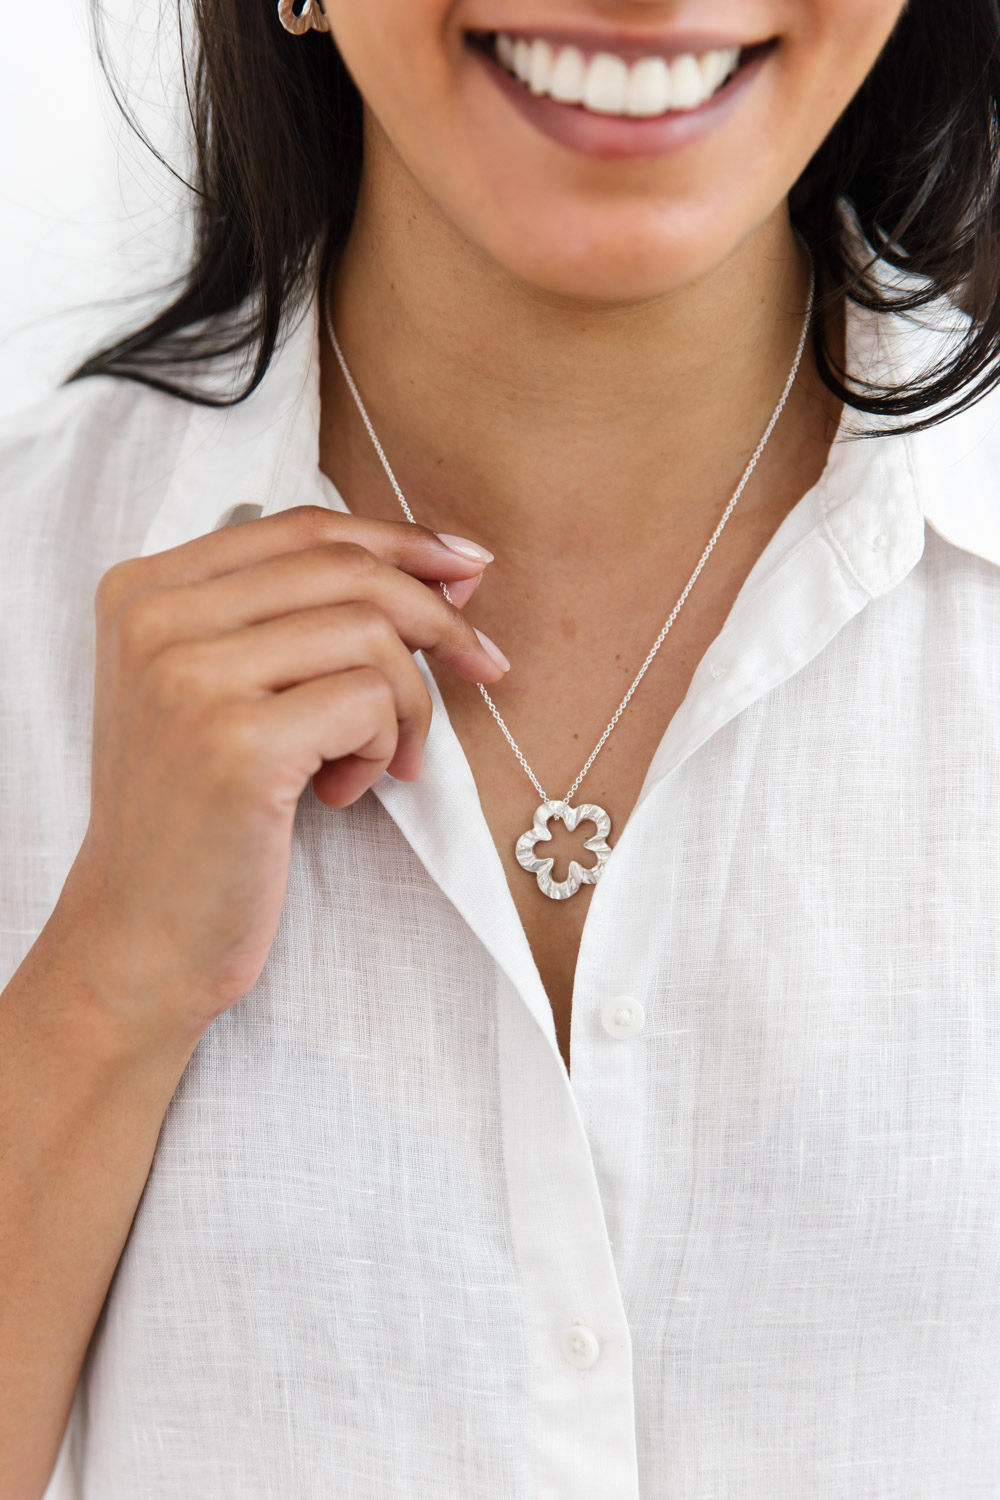 Woman wearing a sterling silver necklace with a delicate chain and a daisy design